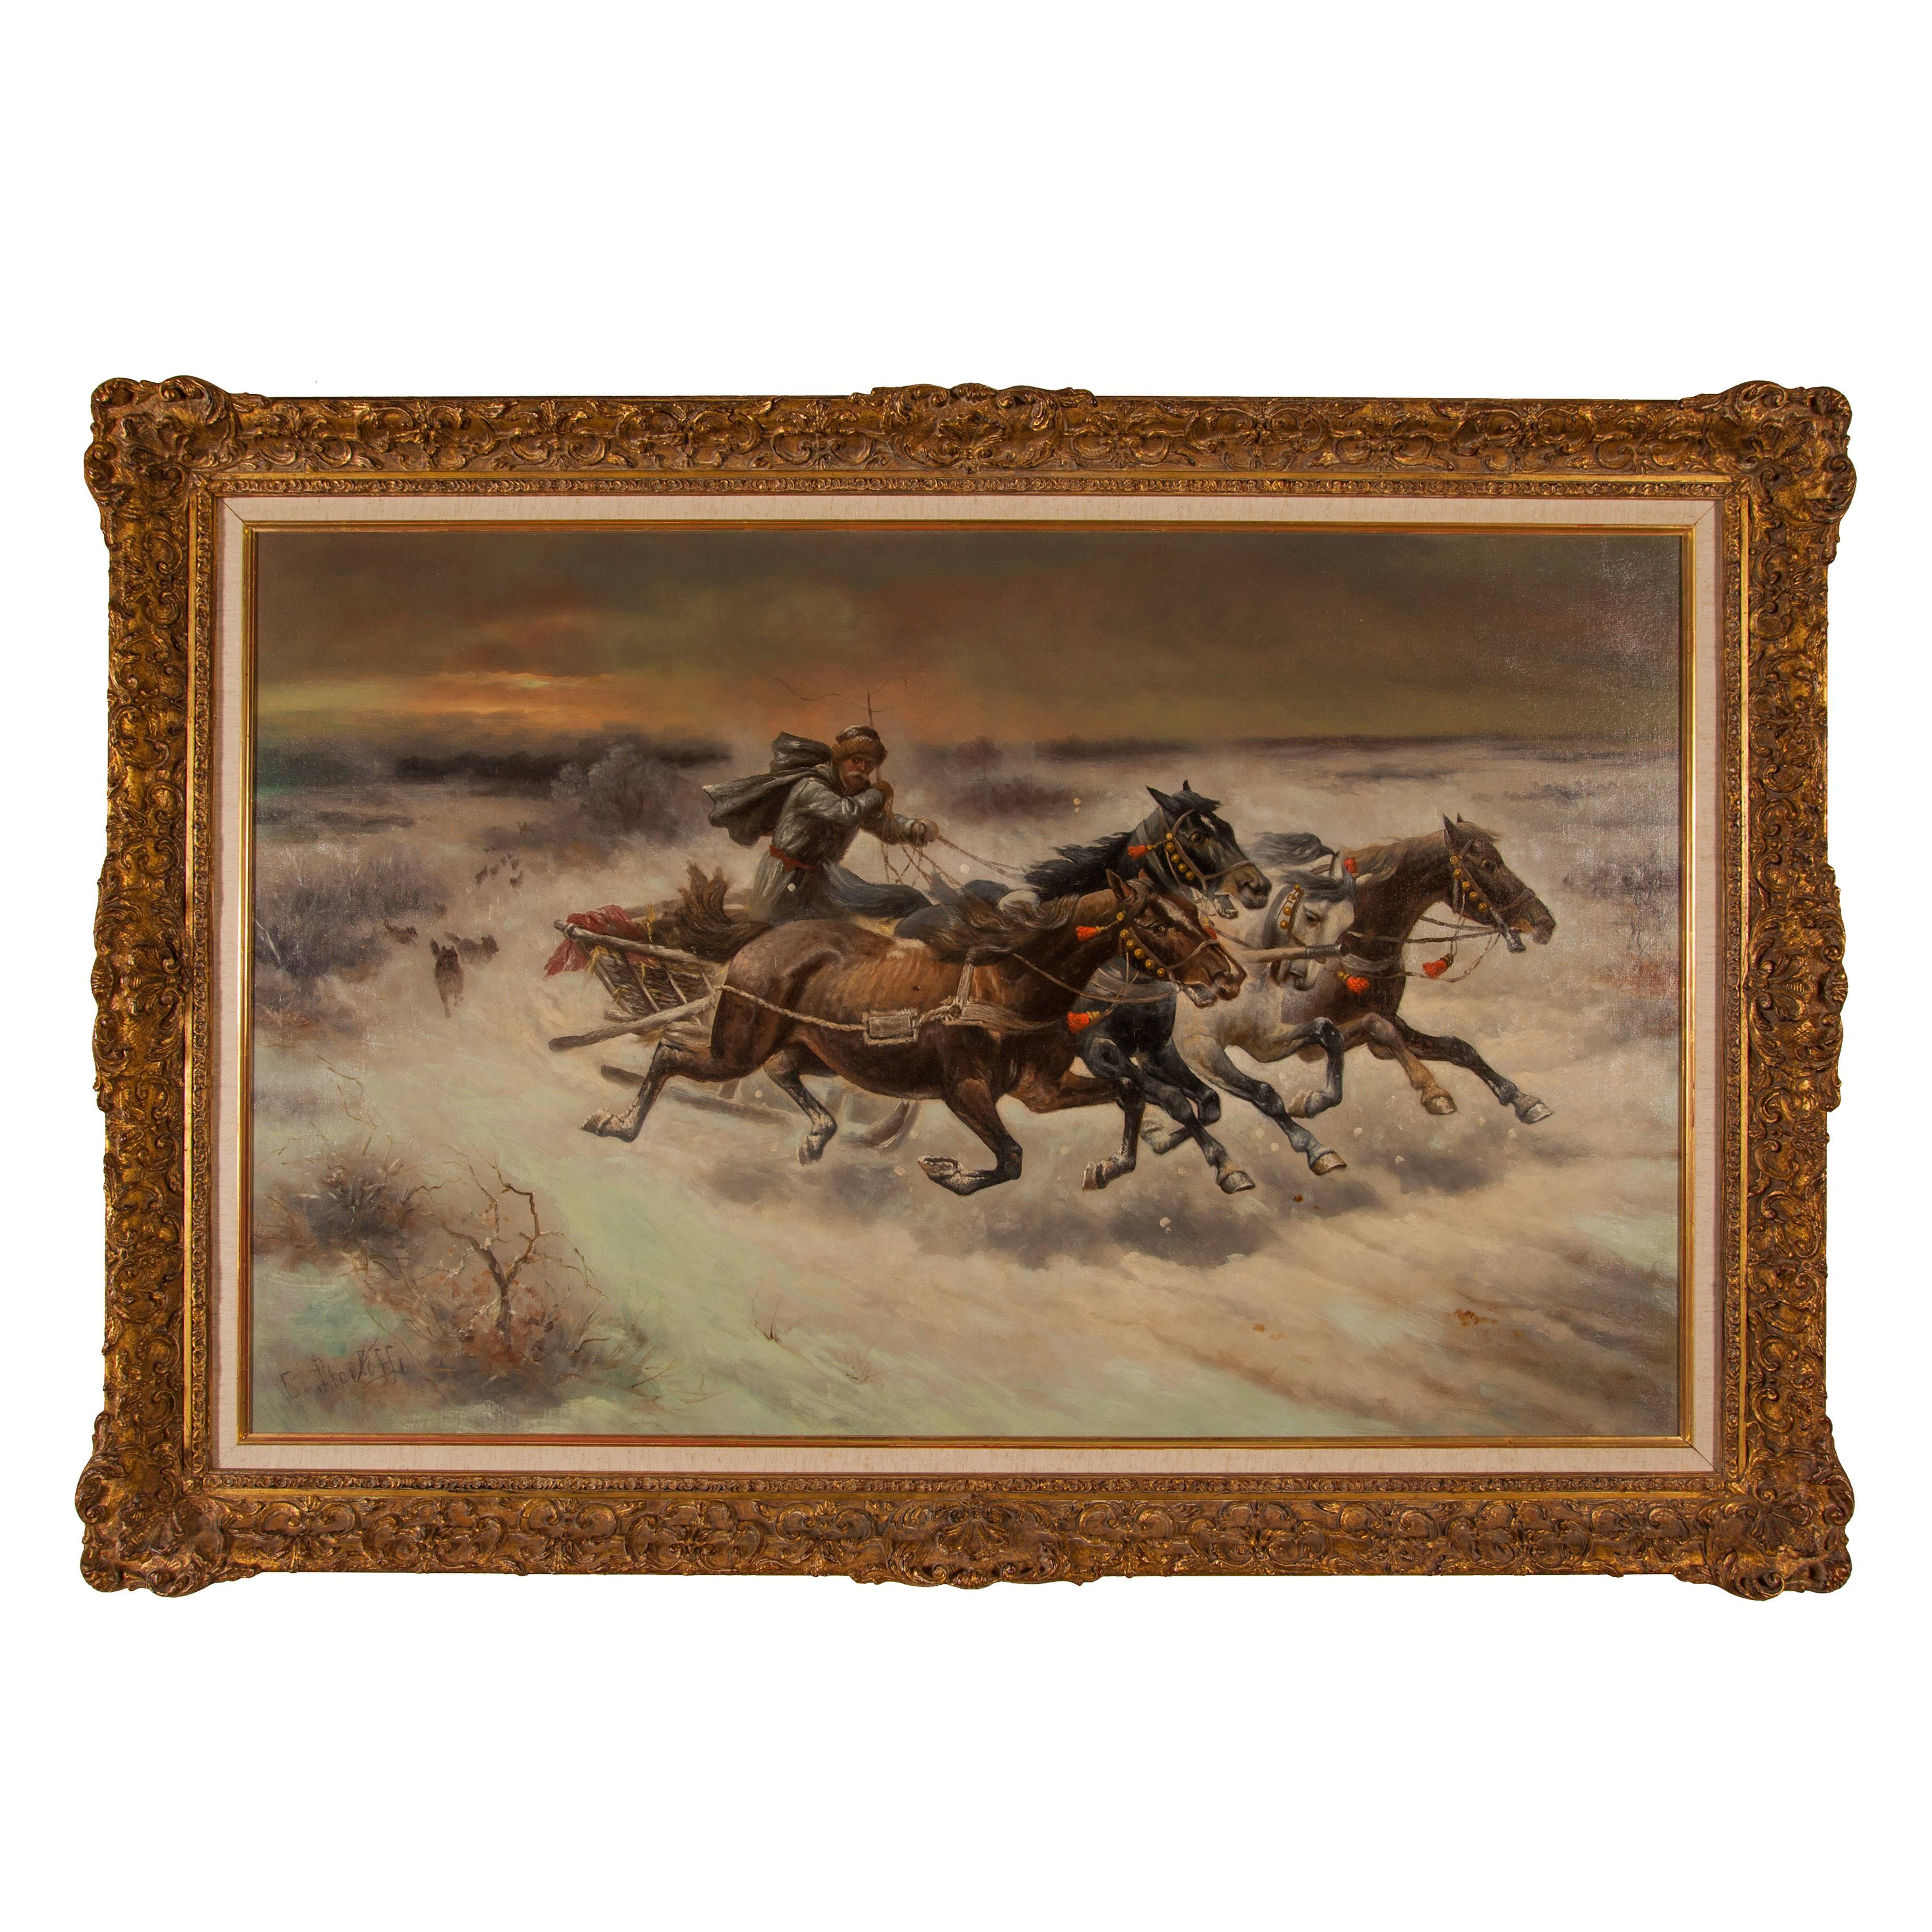 Russian oil painting 'The Chase' signed C. Stoiloff